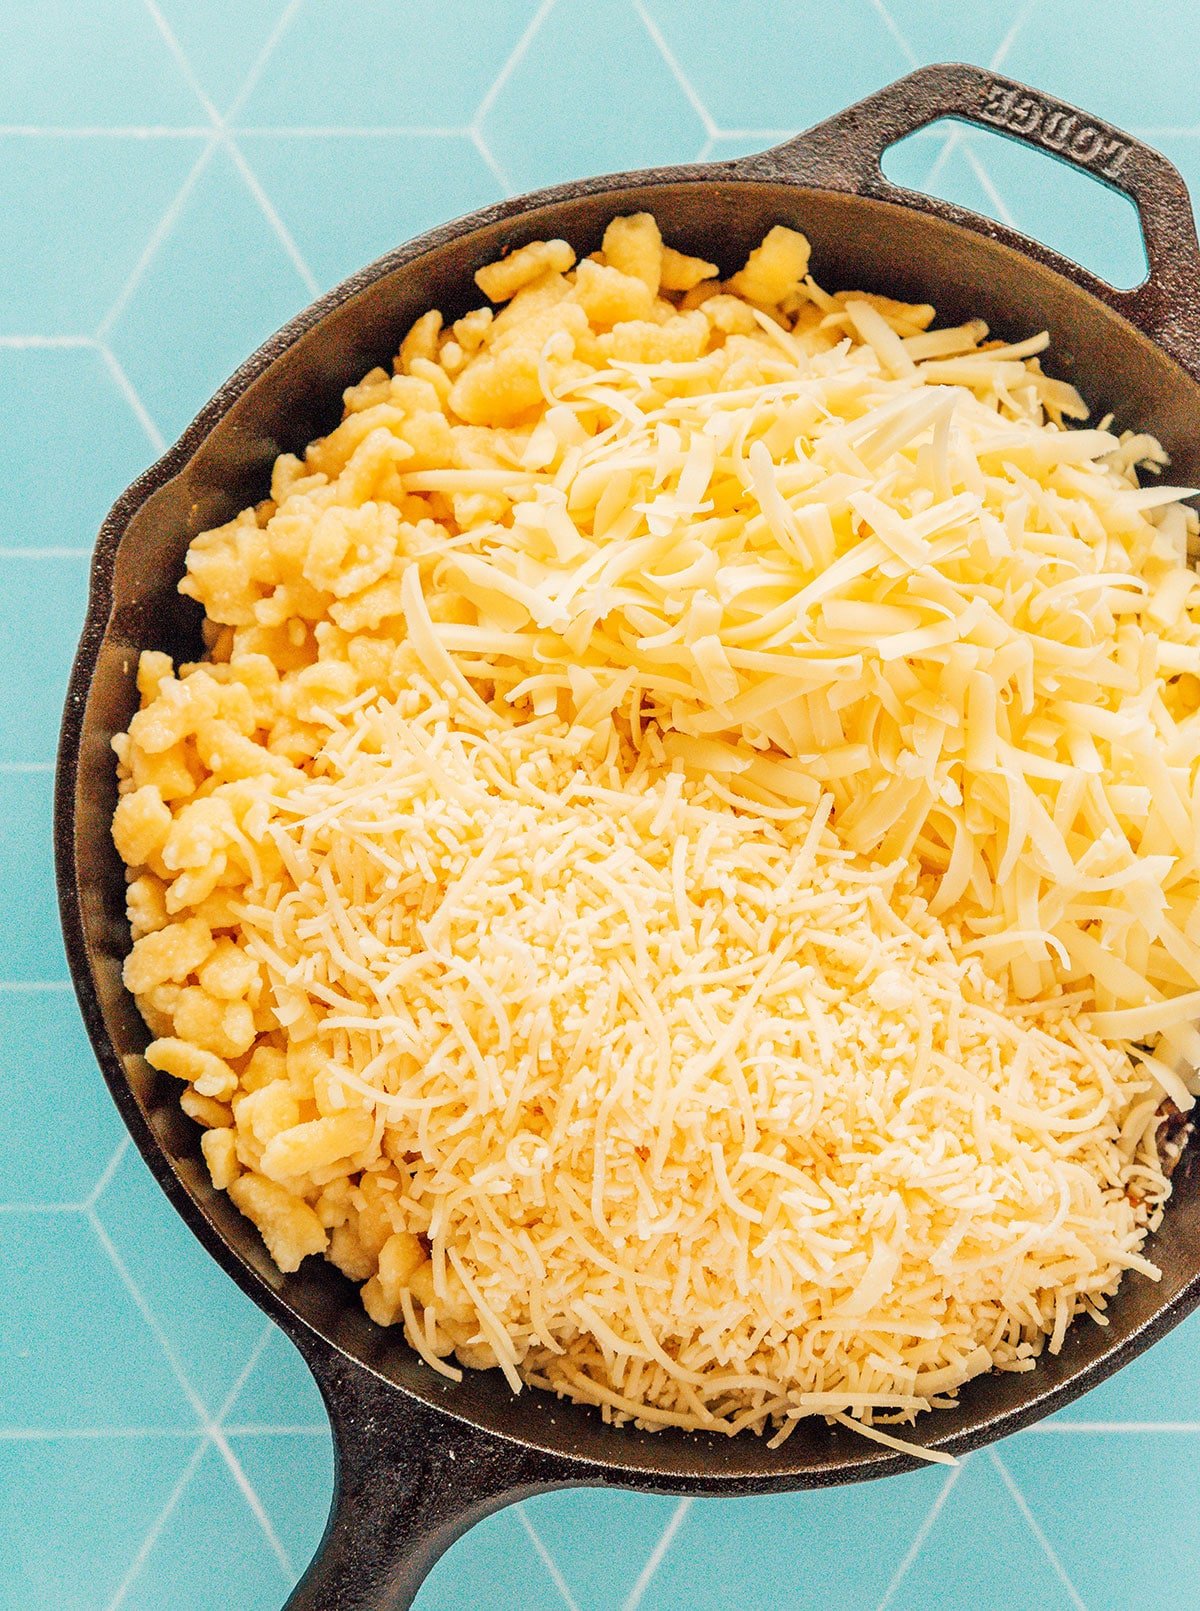 A cast iron skillet filled with caramelized onions, spaetzle, and shredded cheese